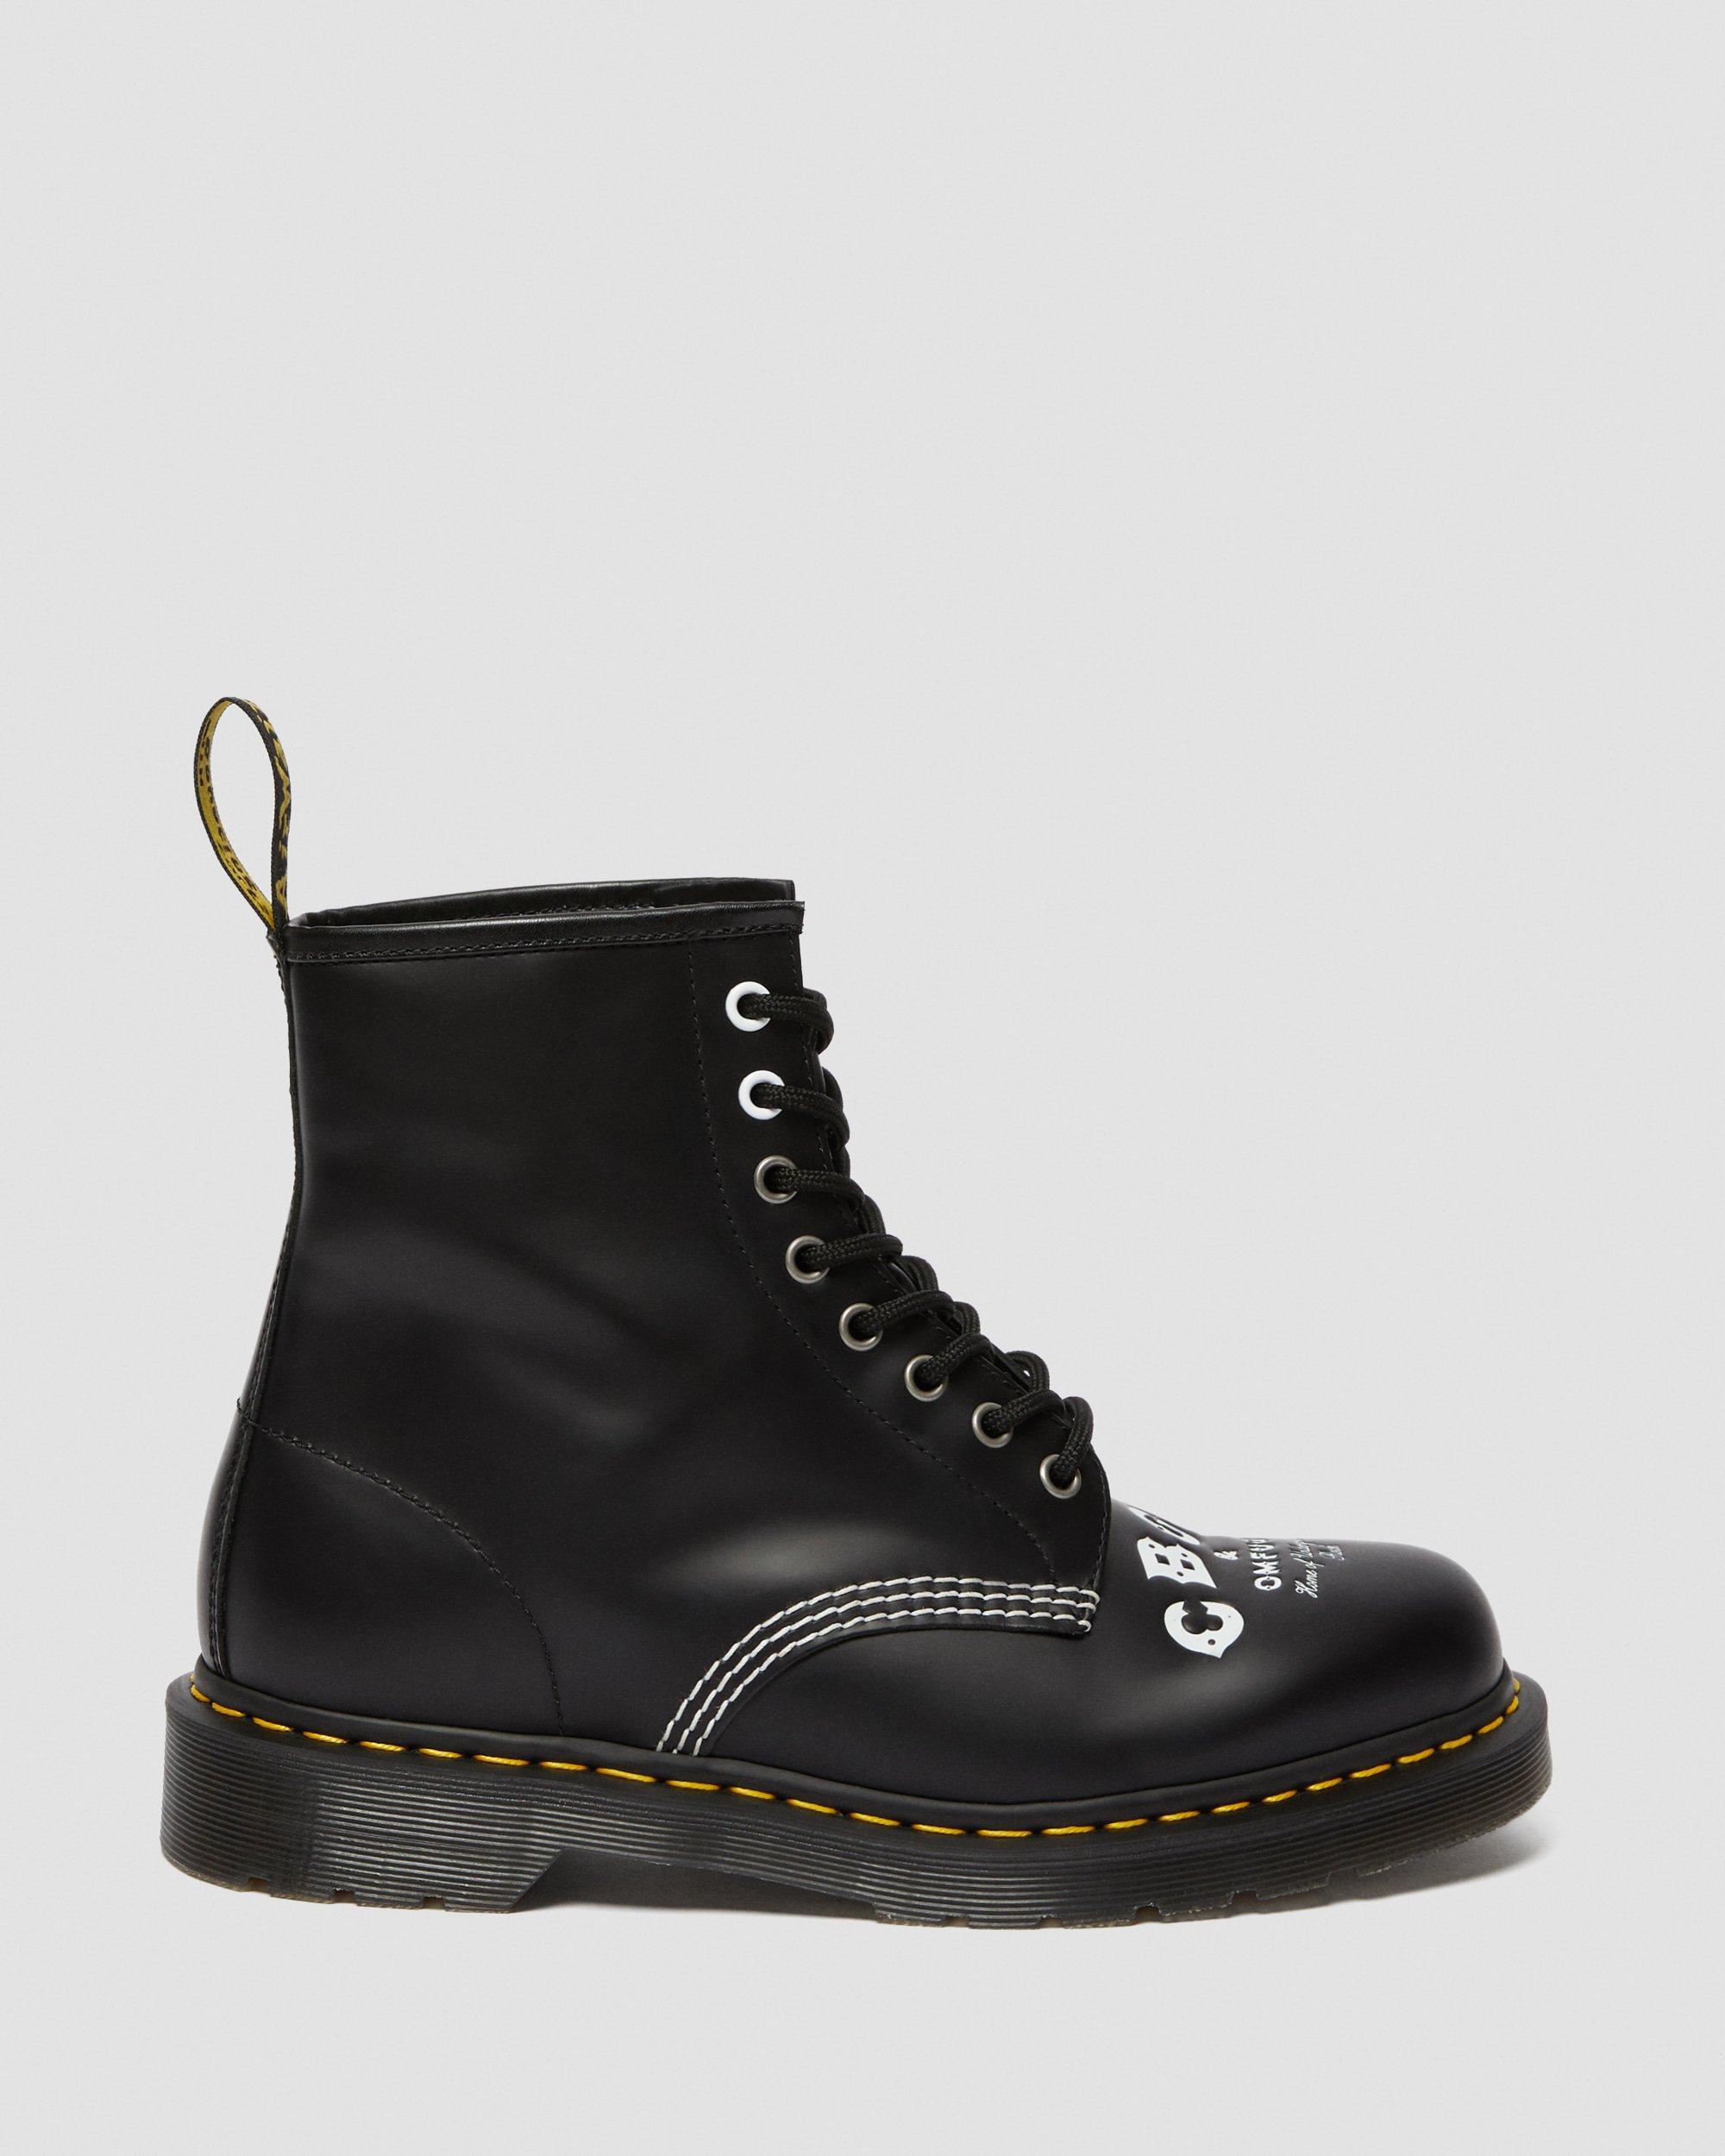 1460 CBGB EMBOSSED LEATHER ANKLE BOOTS | Dr. Martens